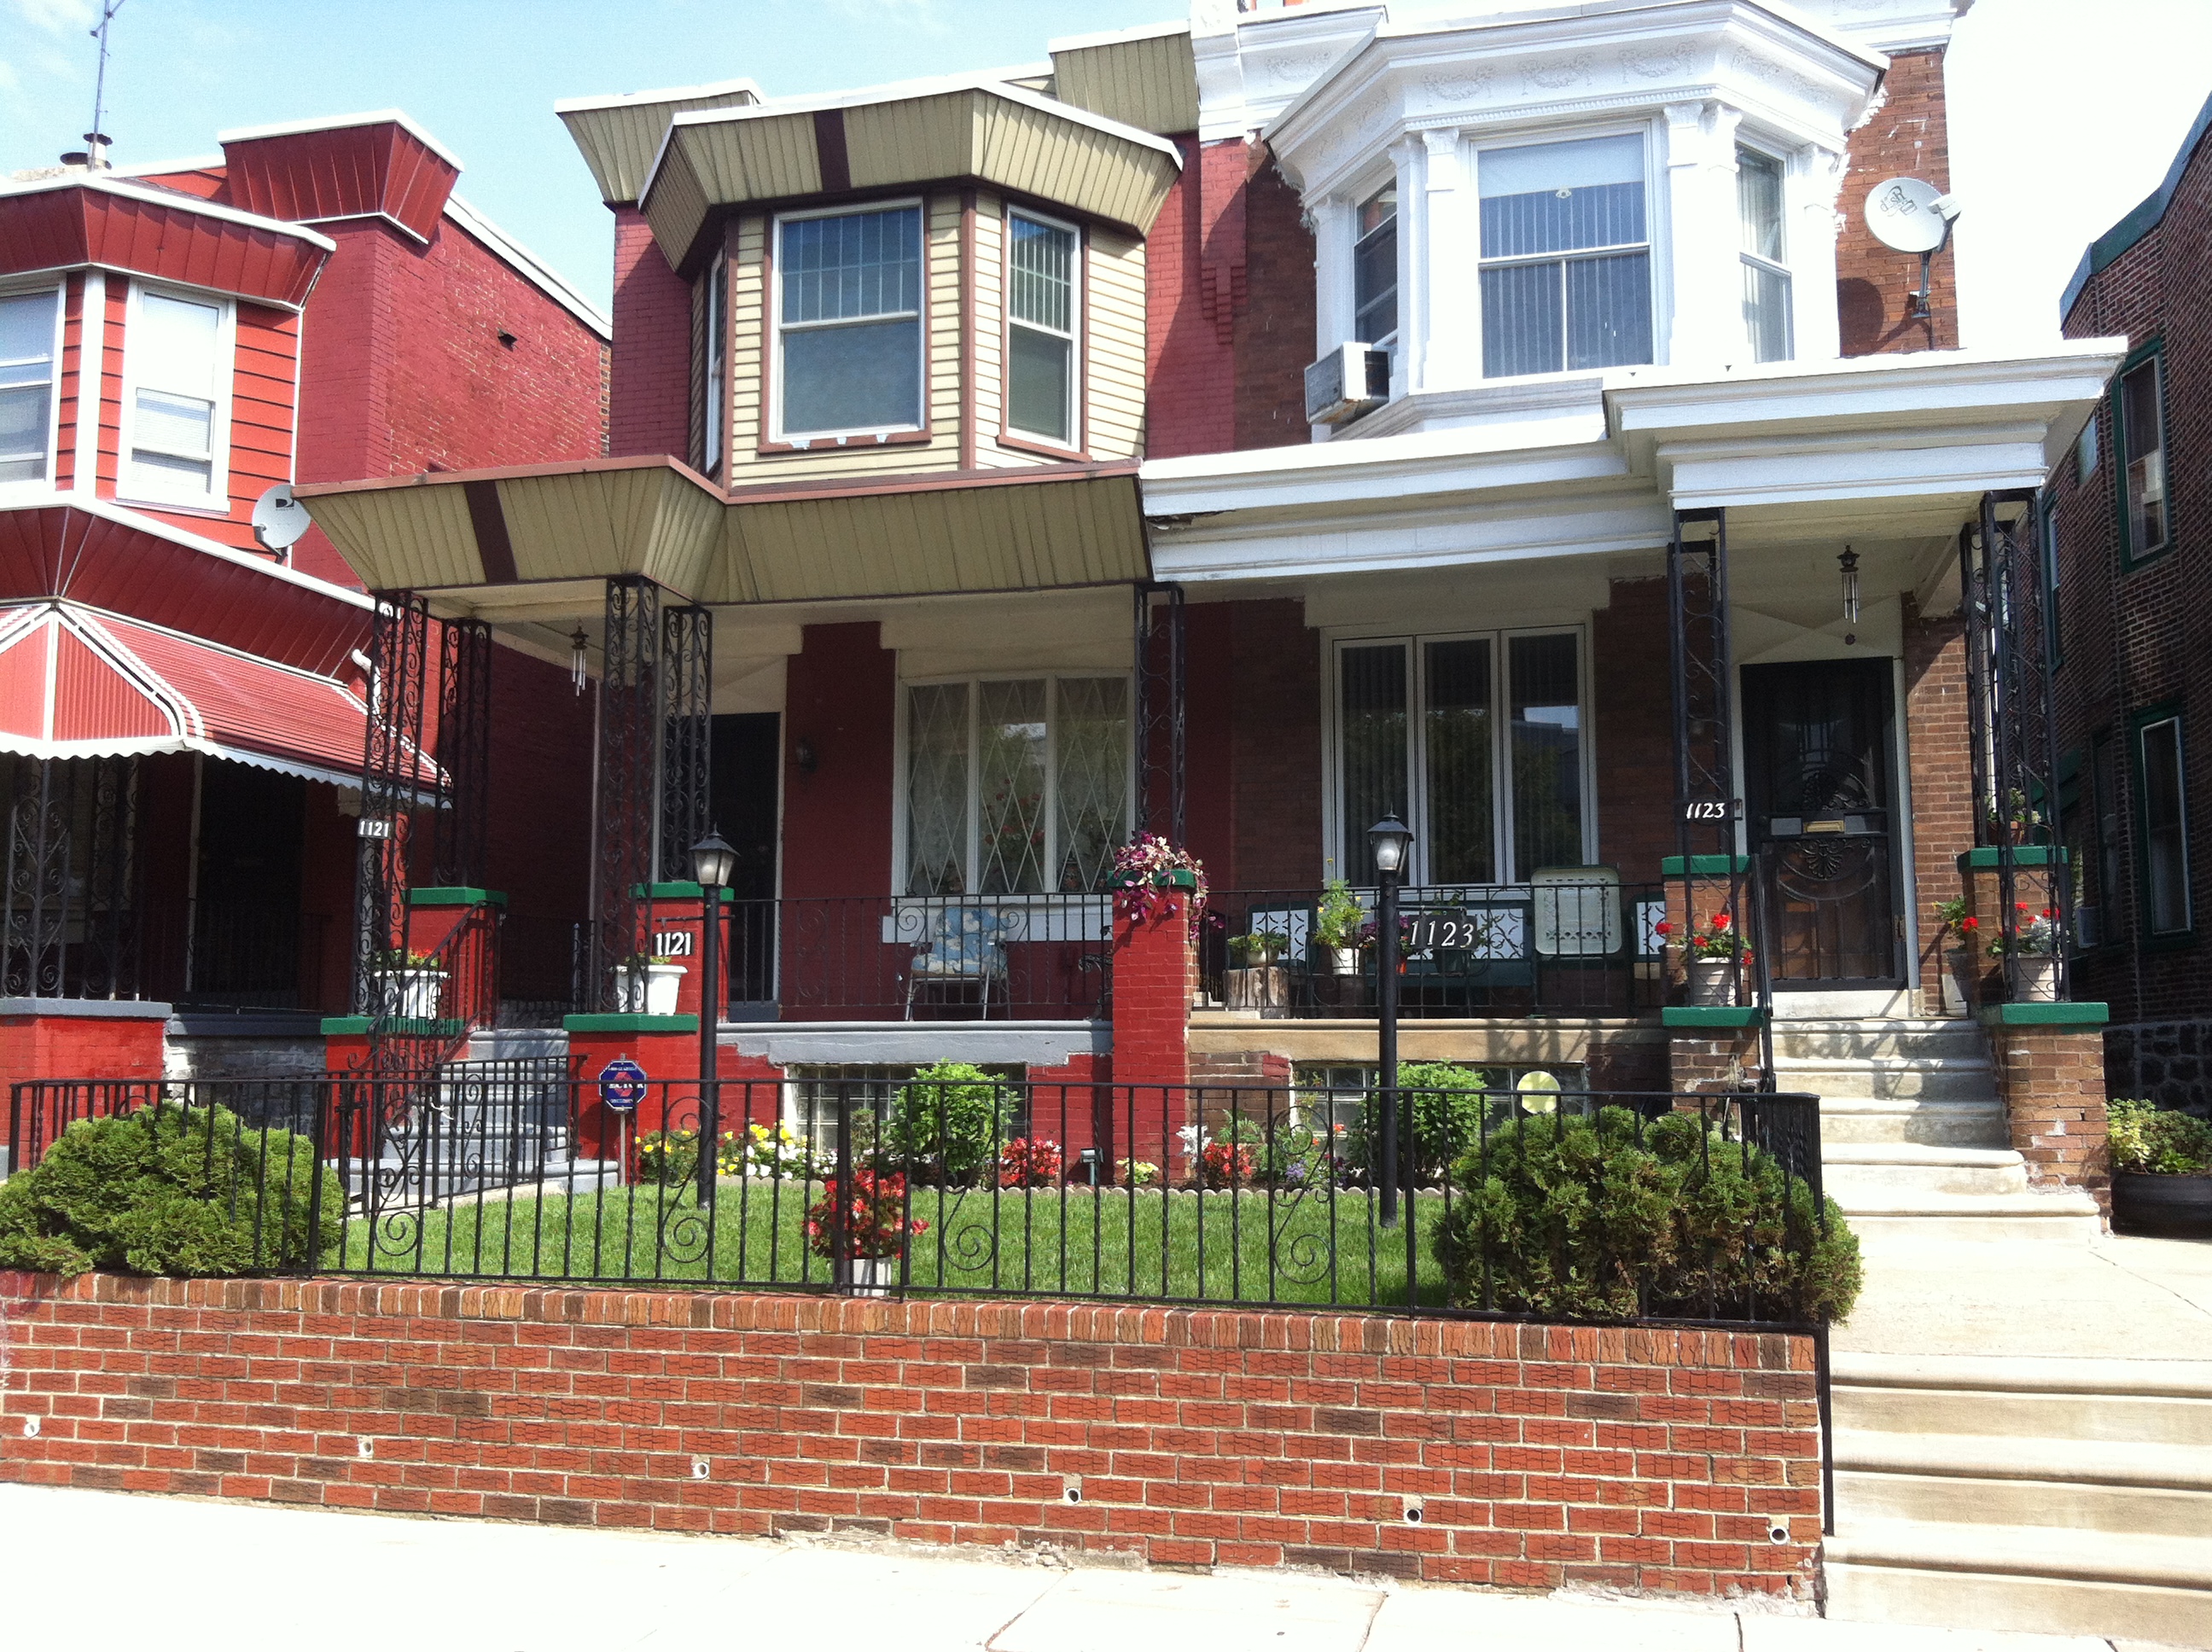 The 1100 block of S. Wilton Street in Kingsessing has tidy twins with well-kept front yards and spotless sidewalks.